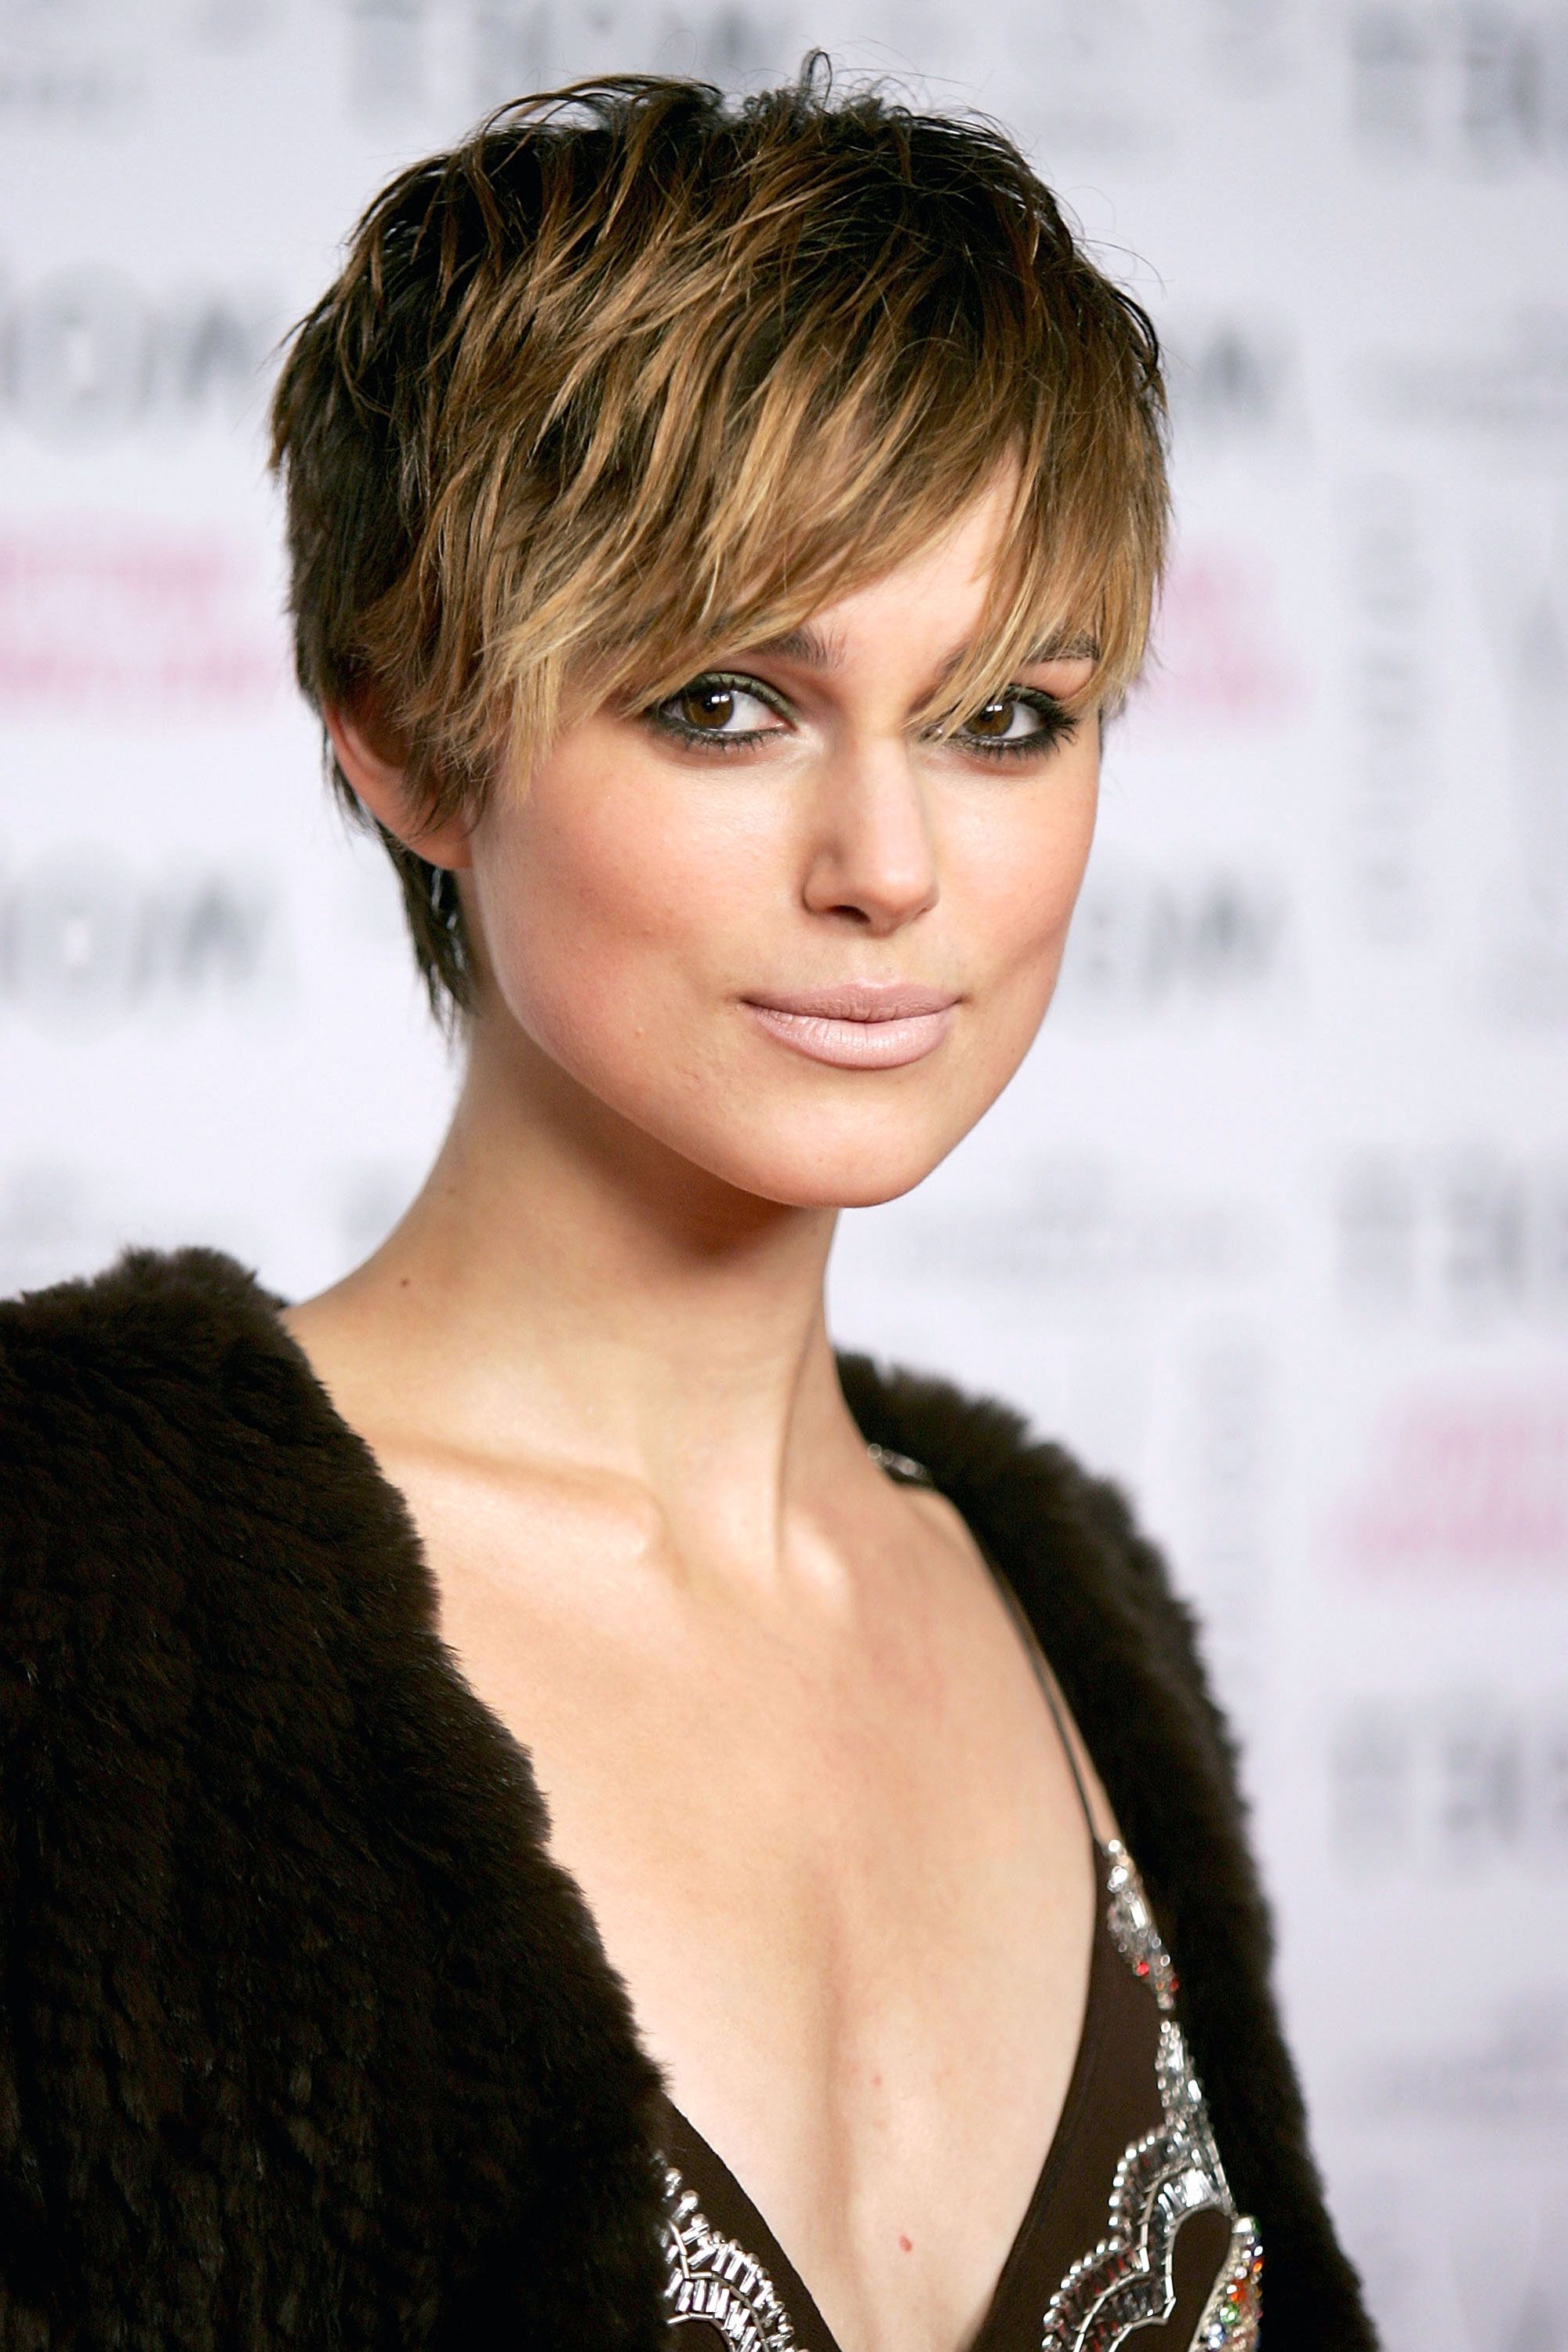 50+ Pixie Cuts We Love For 2018 – Short Pixie Hairstyles From With Regard To Layered Pixie Hairstyles With An Edgy Fringe (View 11 of 20)